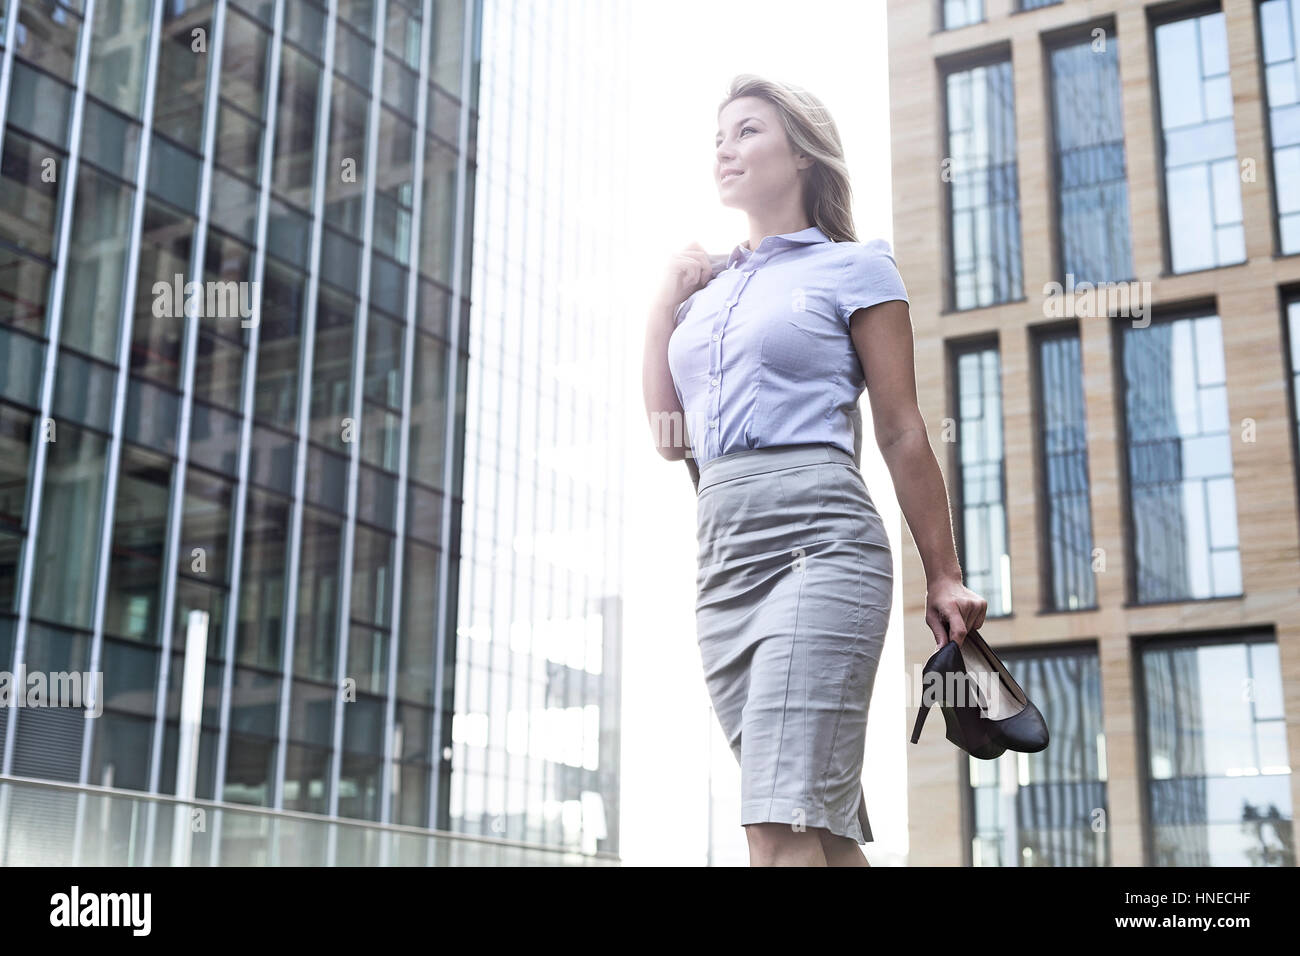 Low angle view of confident businesswoman holding high heels while standing outside office buildings Stock Photo